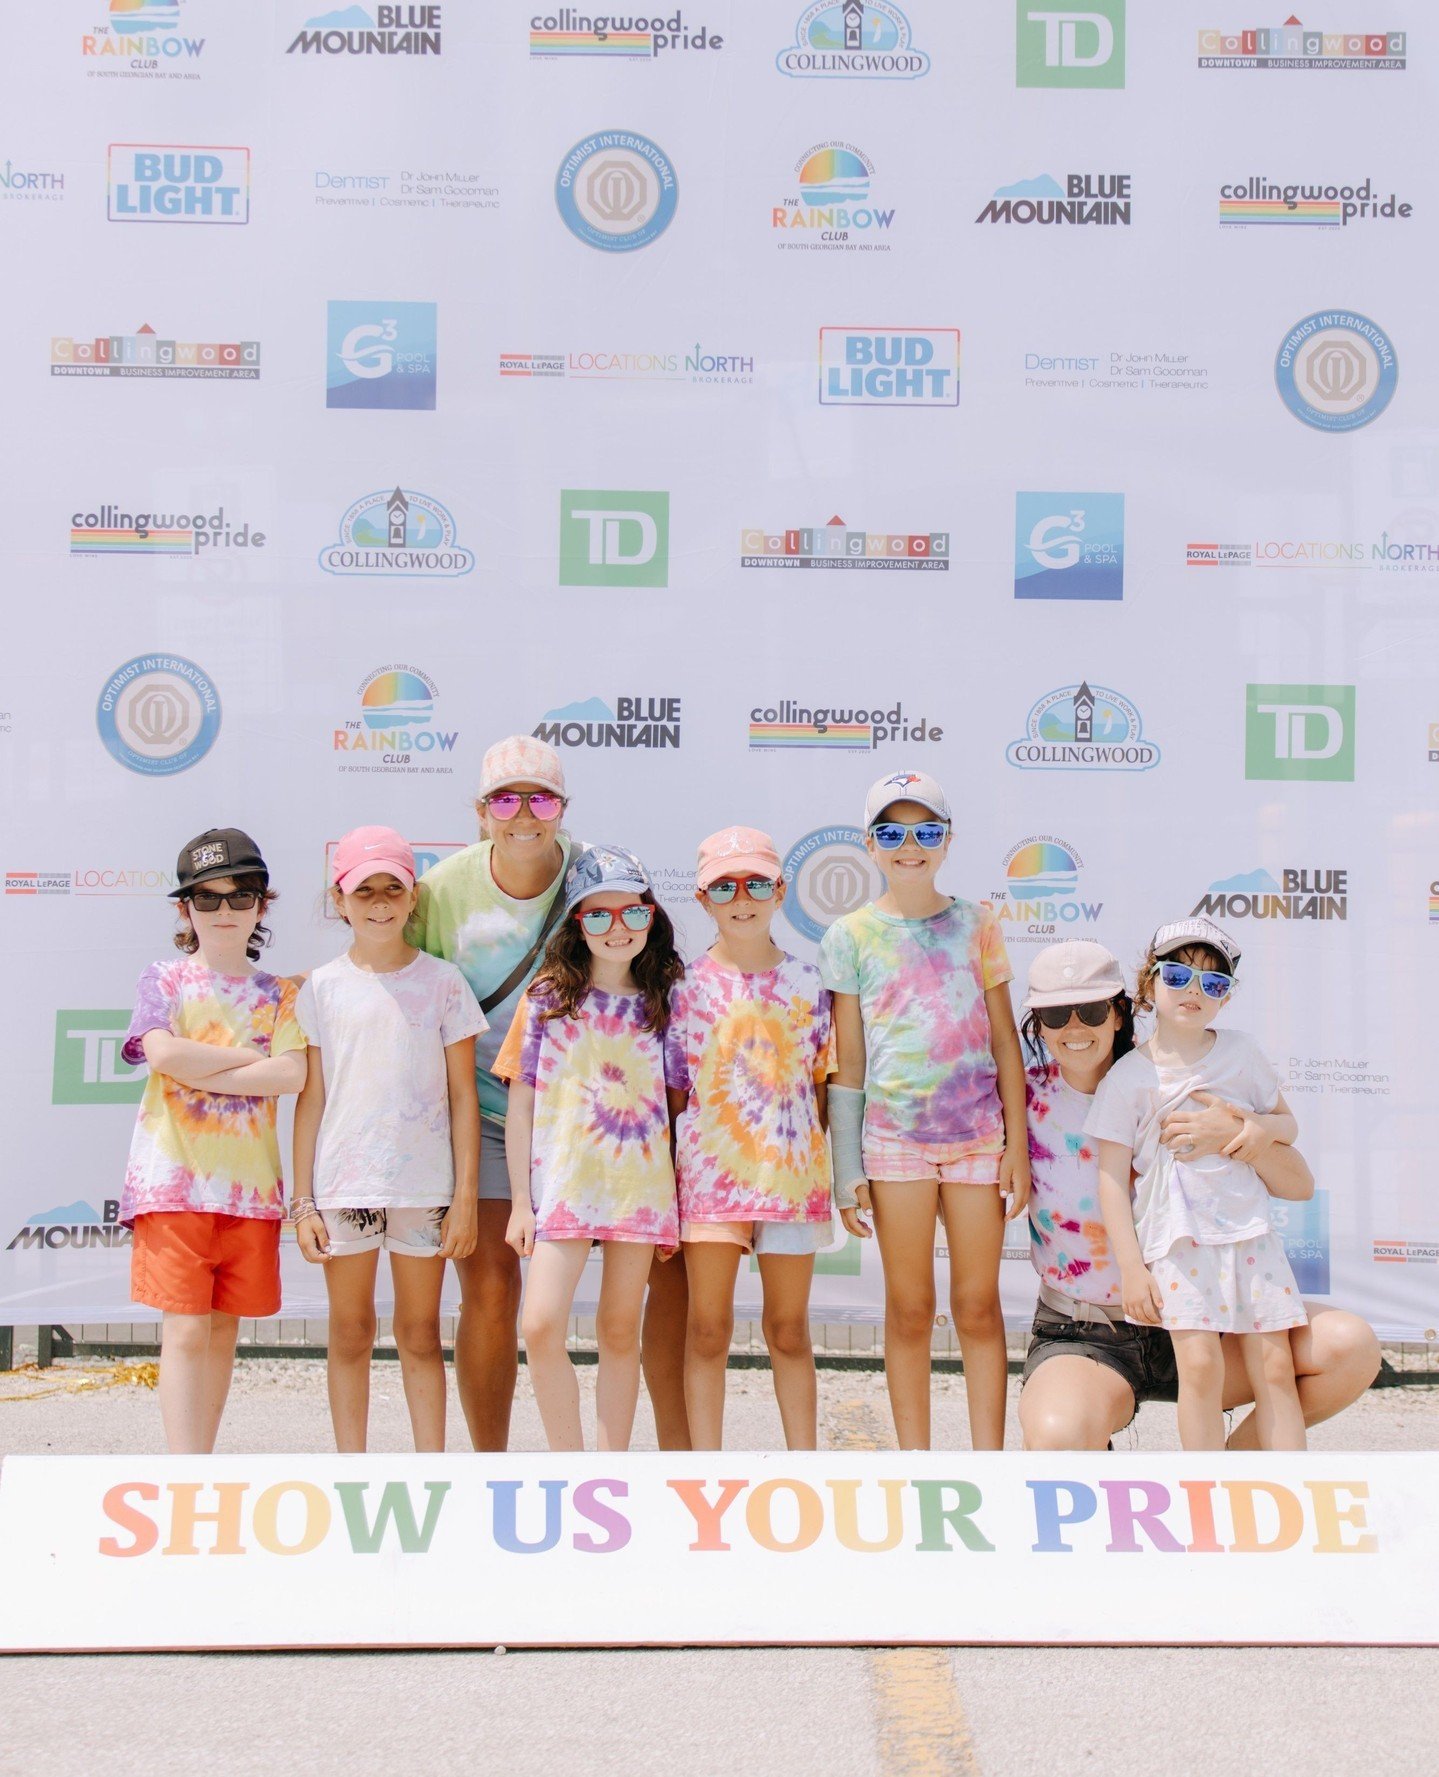 Who's ready to show their PRIDE!! 🌈 We can't wait for another unforgettable Collingwood Pride Festival - stay tuned to our socials or subscribe to our email list for updates and announcements! 💥 ⁠
⁠
#cwpride24